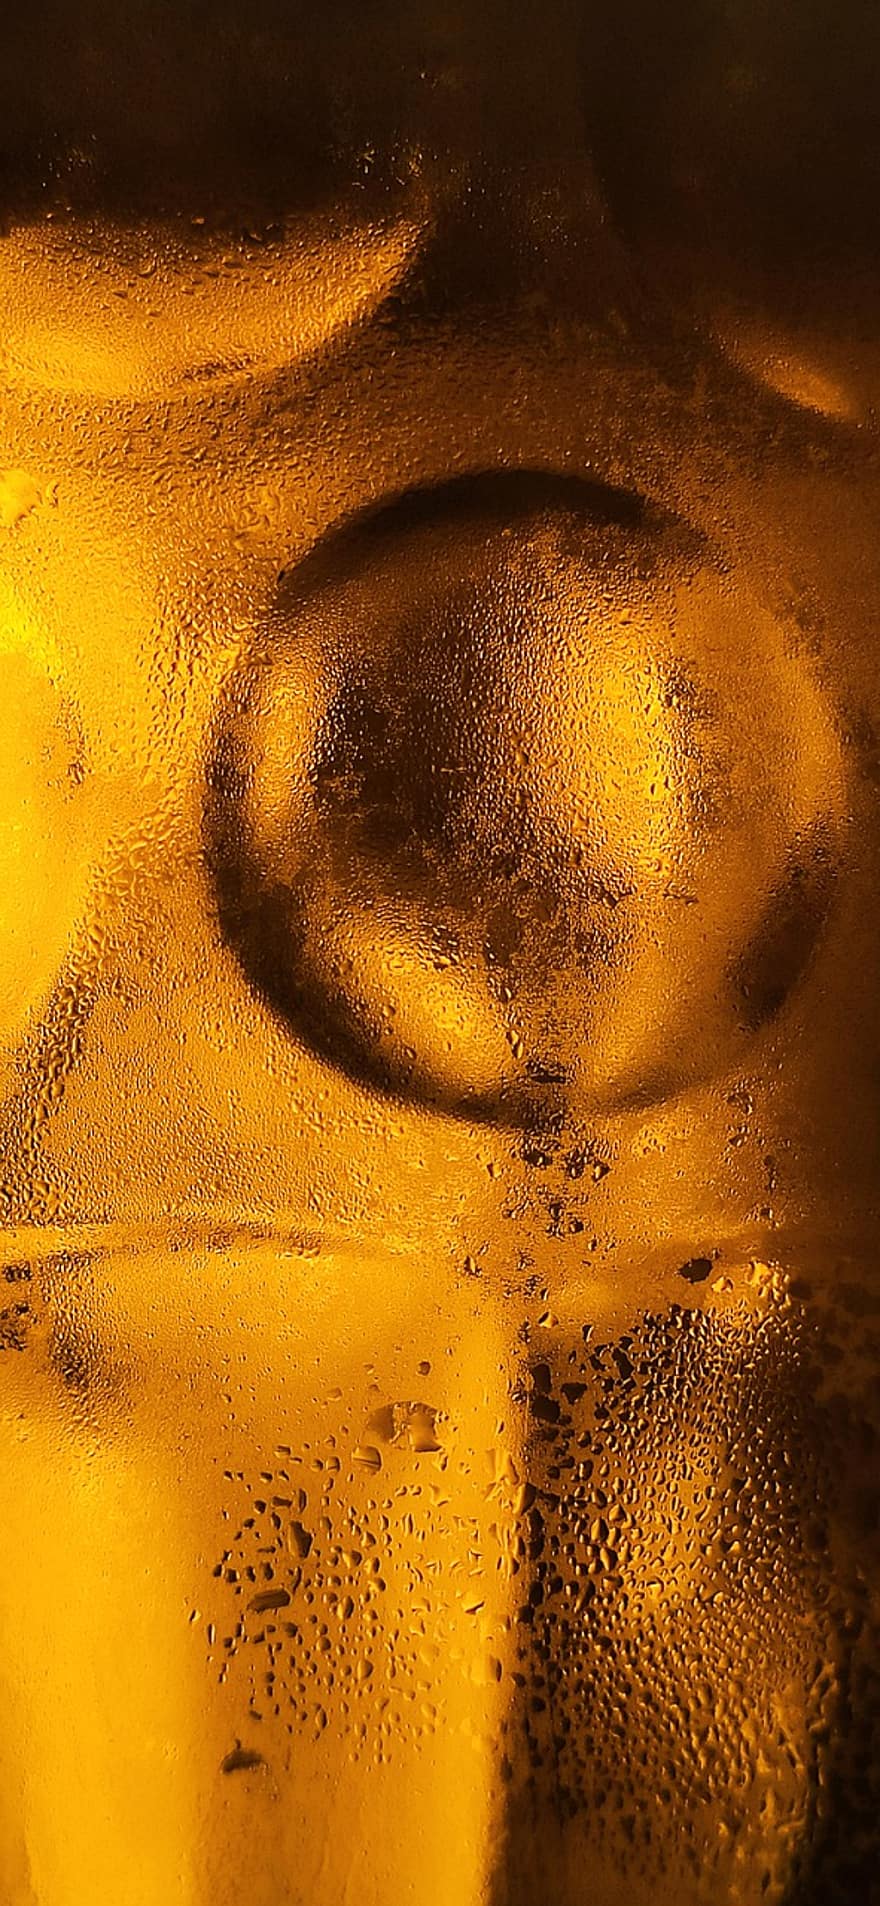 Bar, Alcohol, Glass, Water, Brewery, backgrounds, drop, liquid, wet, close-up, abstract